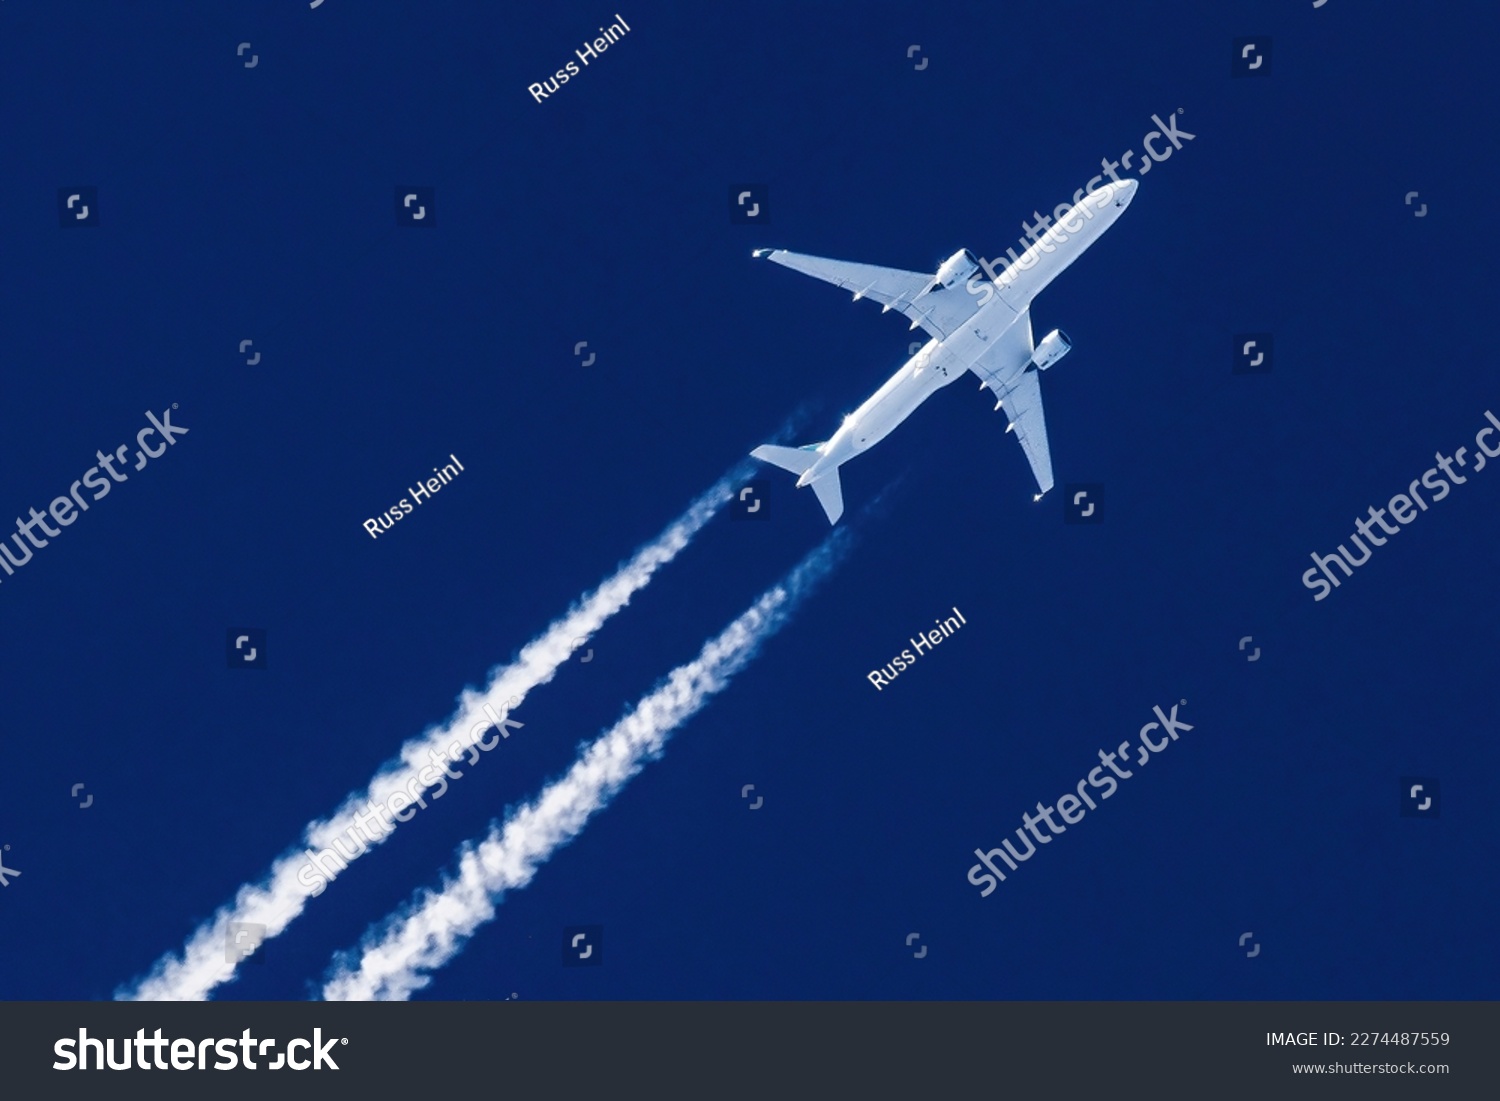 Sharp telephoto close-up of jet plane aircraft with contrails cruising from Hong Kong to New York, altitude AGL 37,000 feet, ground speed 554 knots #2274487559